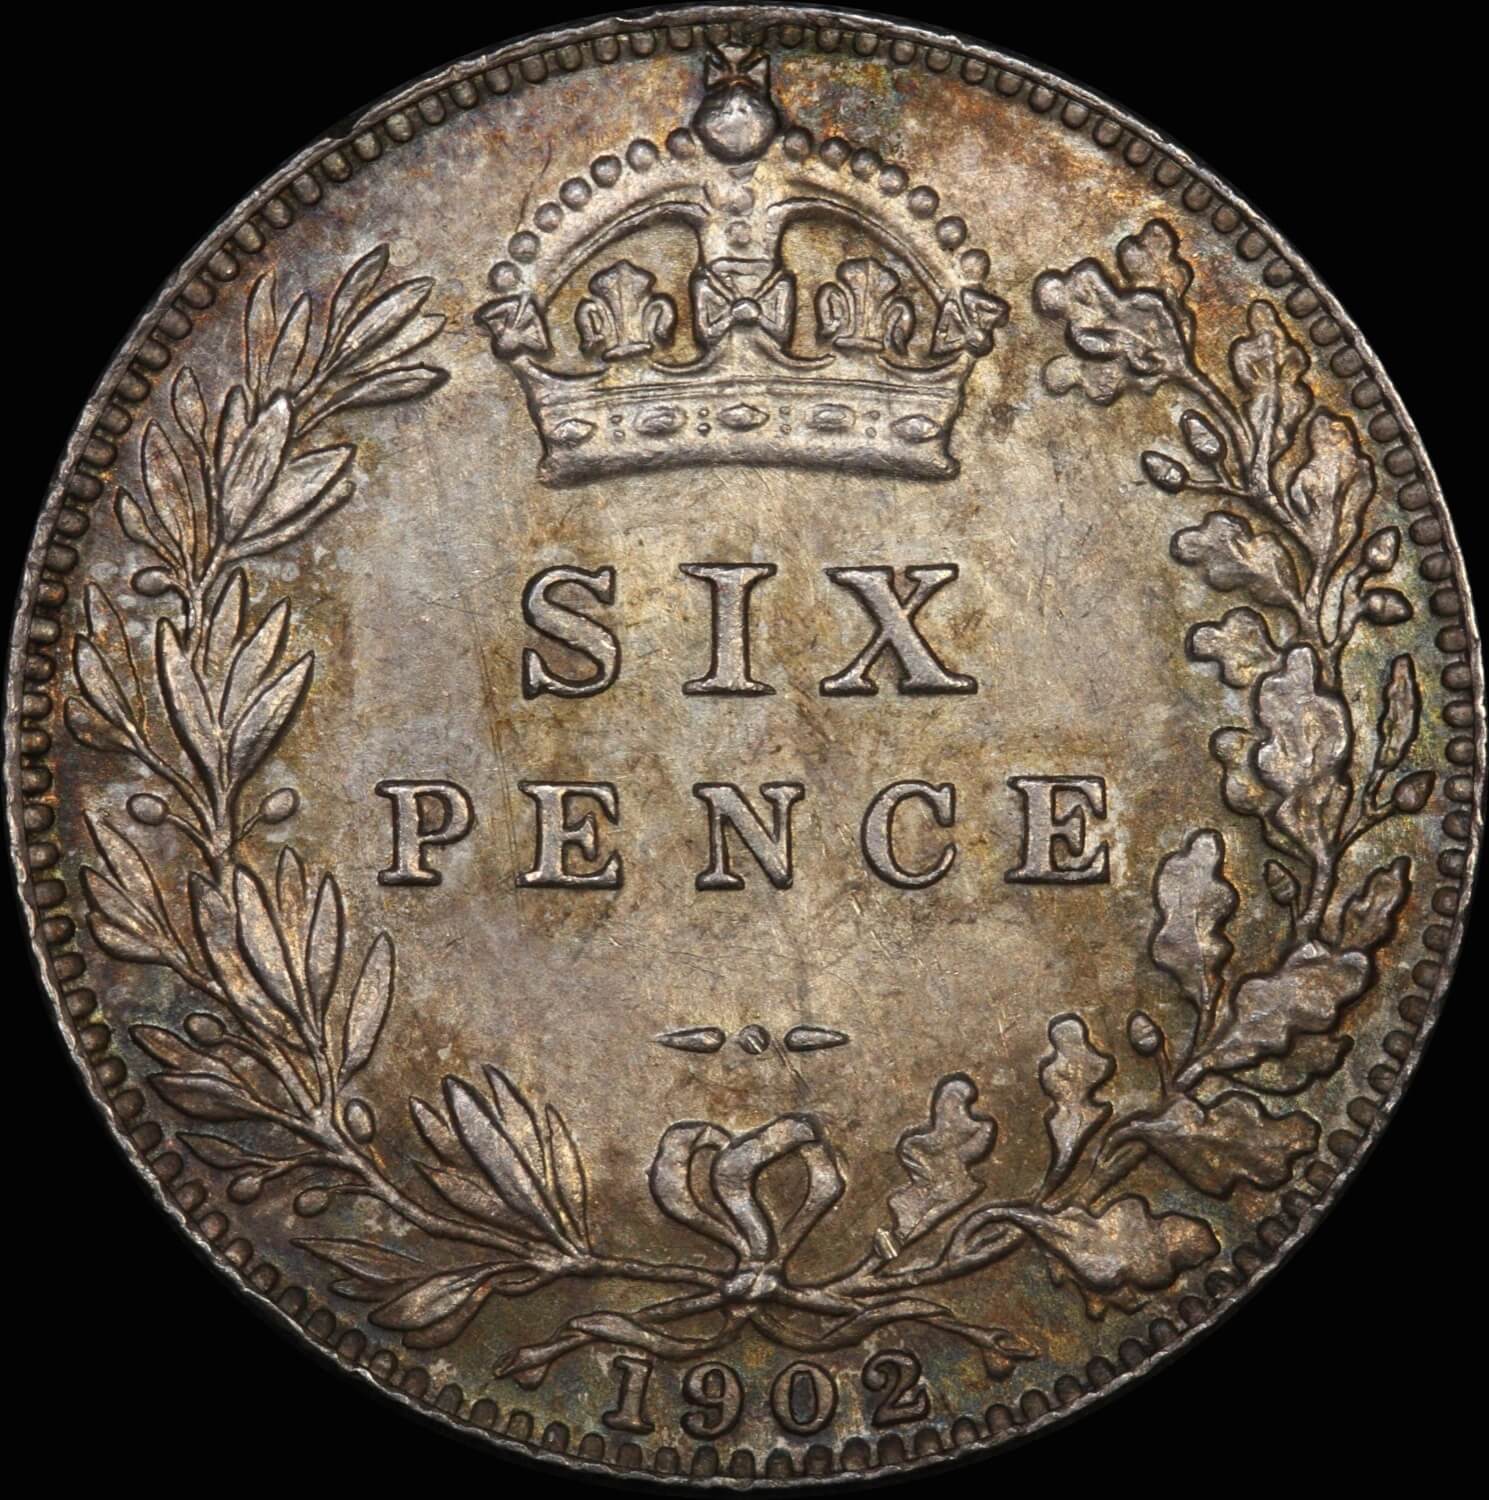 1902 Silver Sixpence Edward VII PCGS MS64 product image